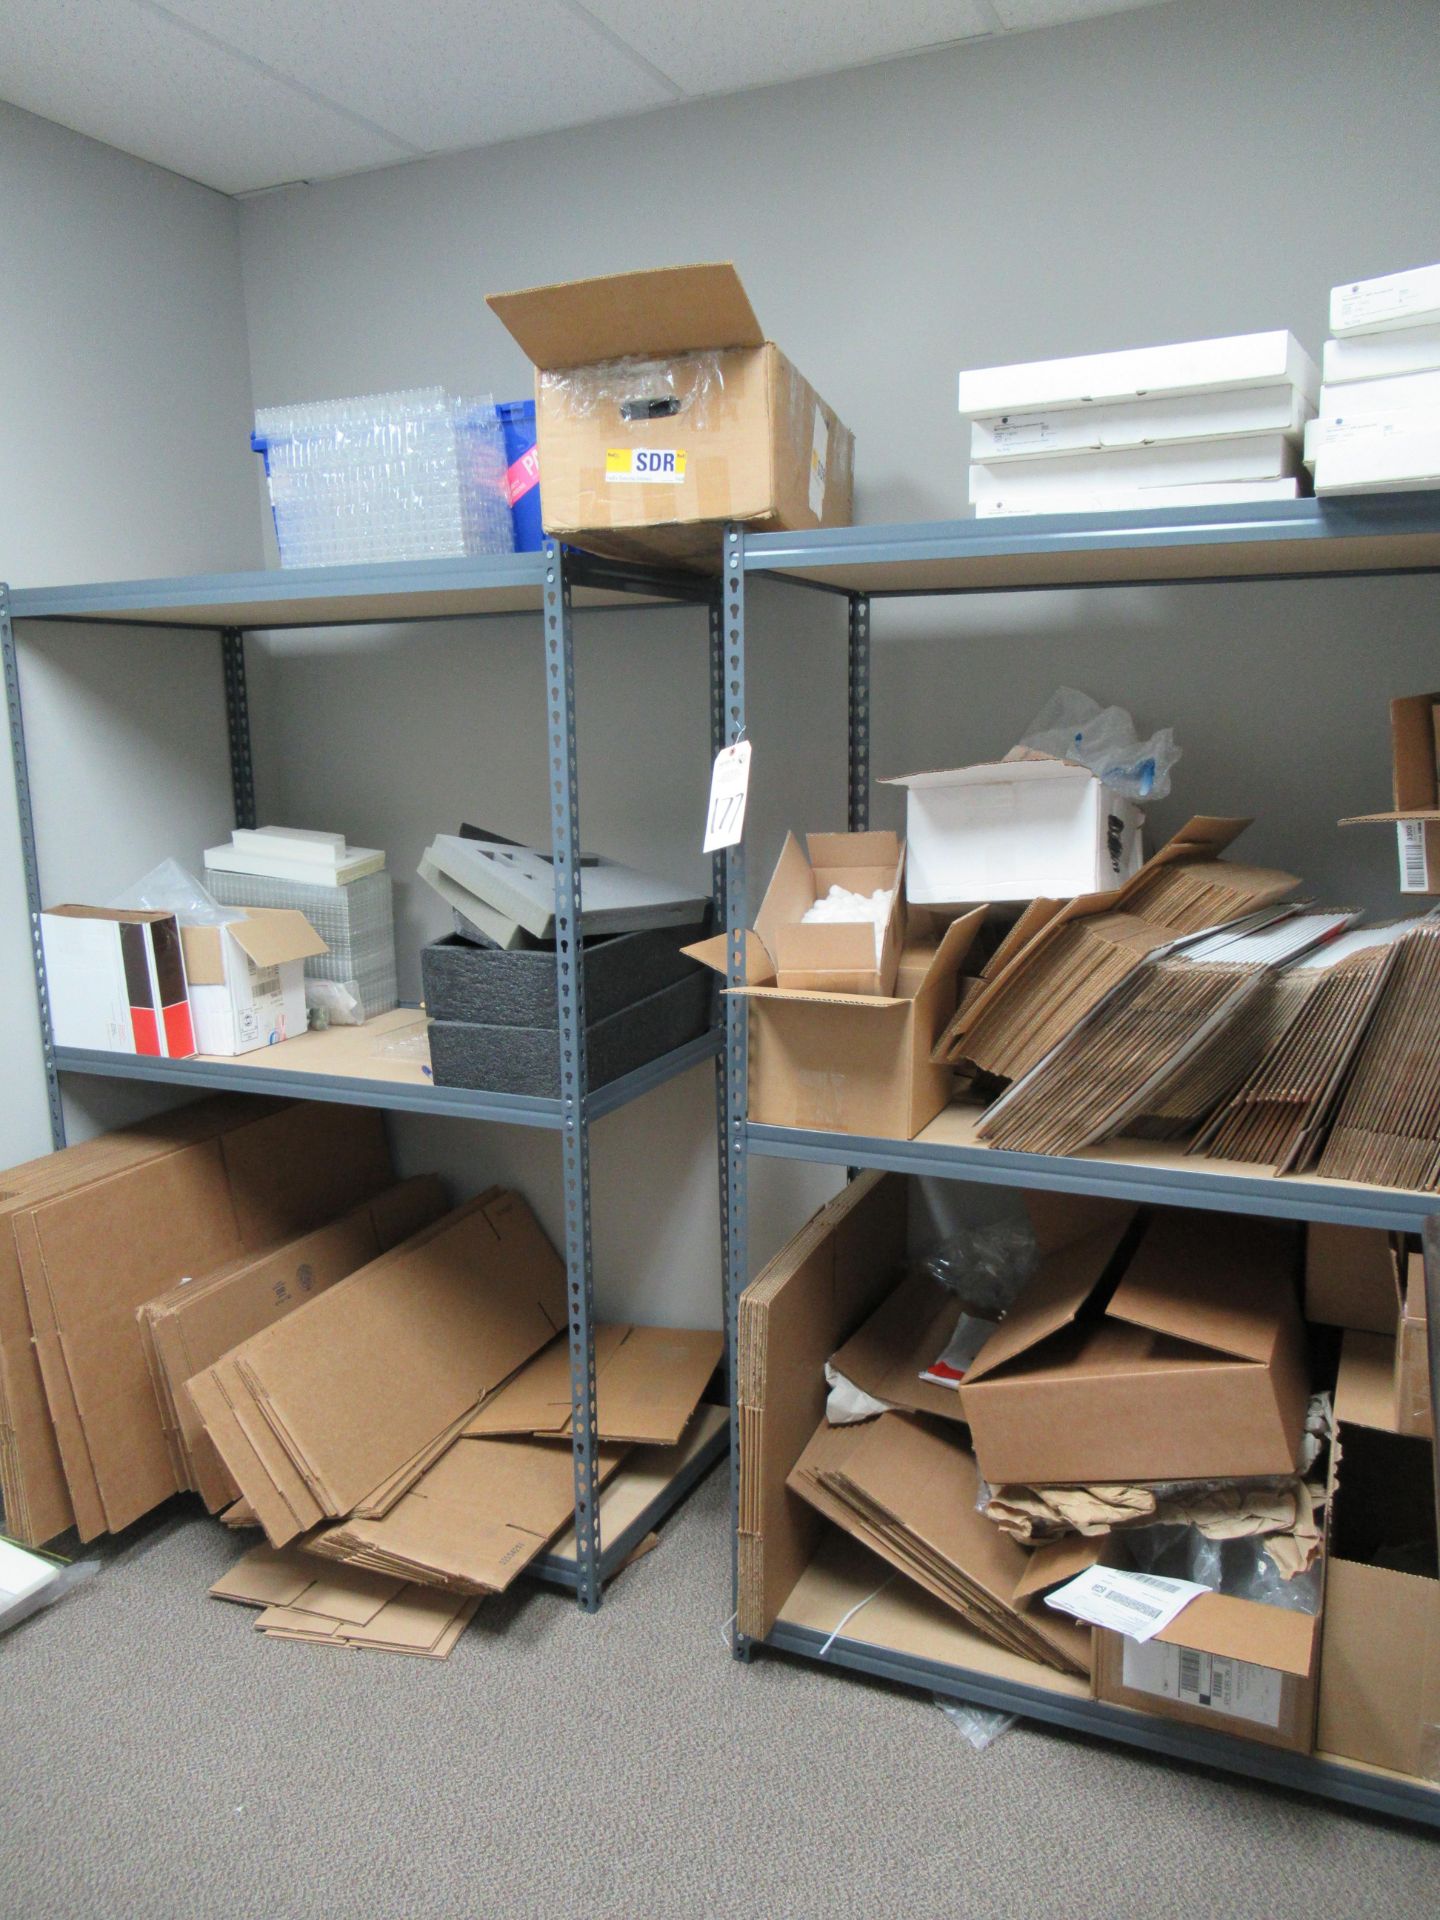 (2) Steel Racks with Assorted UPS, FedEx & Unmarked Disassembled Cardboard Boxes